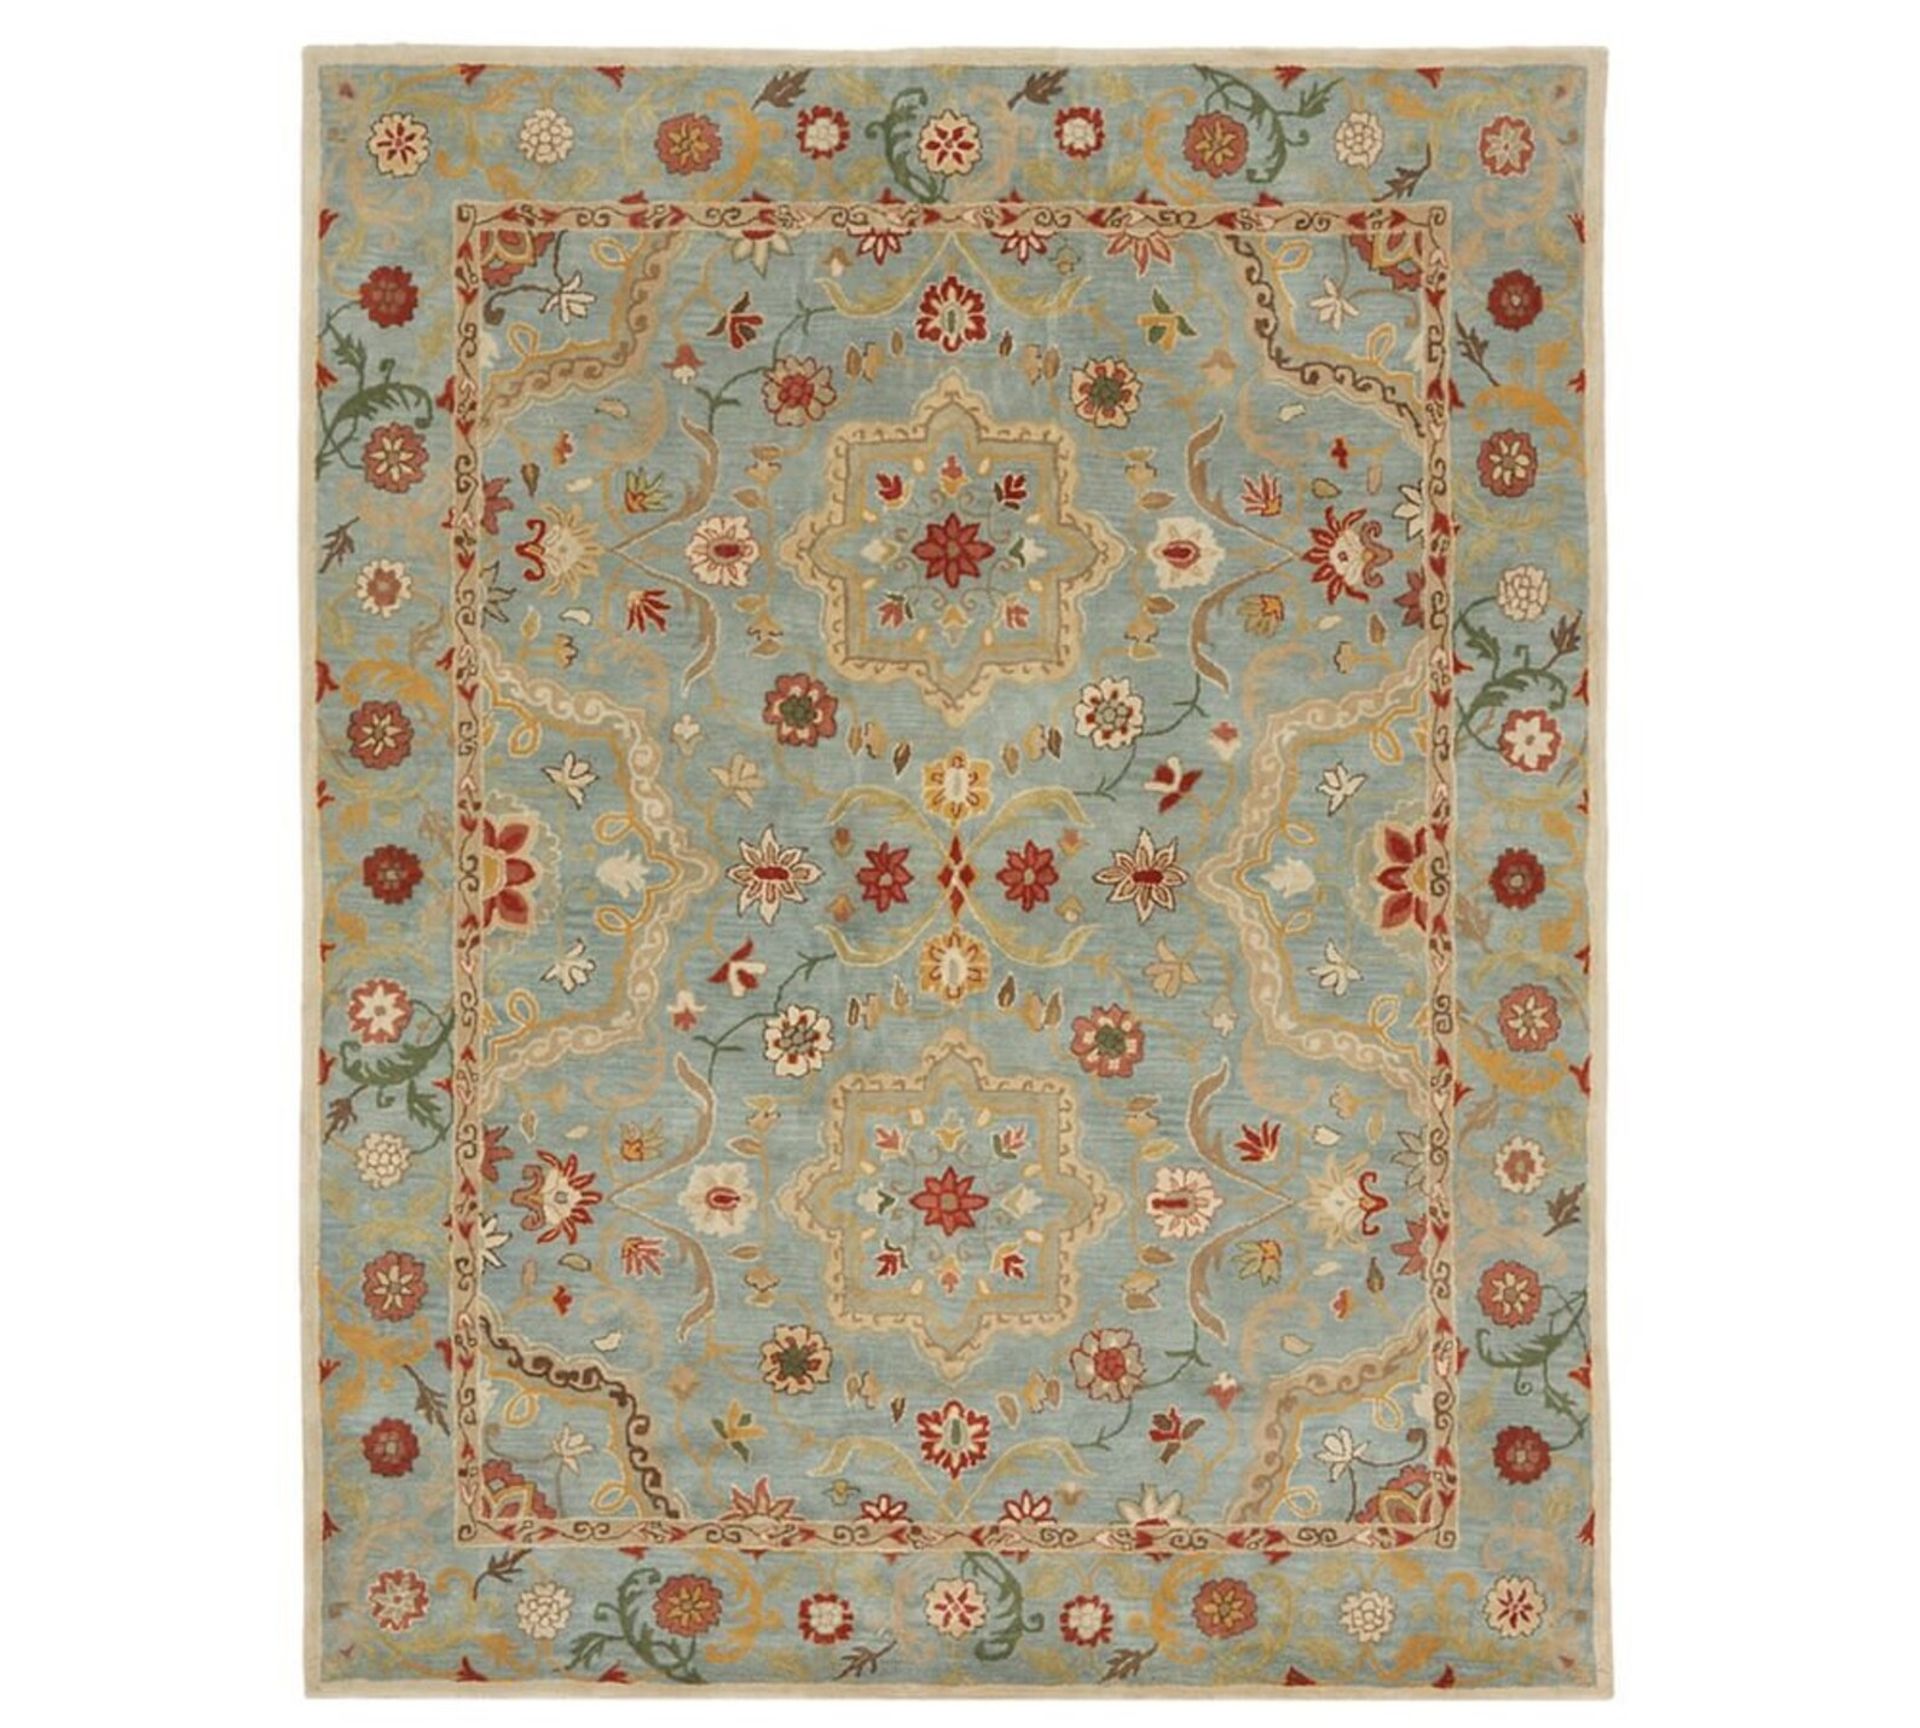 Handmade 100% Brand New Natural Wool Rug Unique Colour And Design Inspired From The Persian Floral - Image 3 of 5